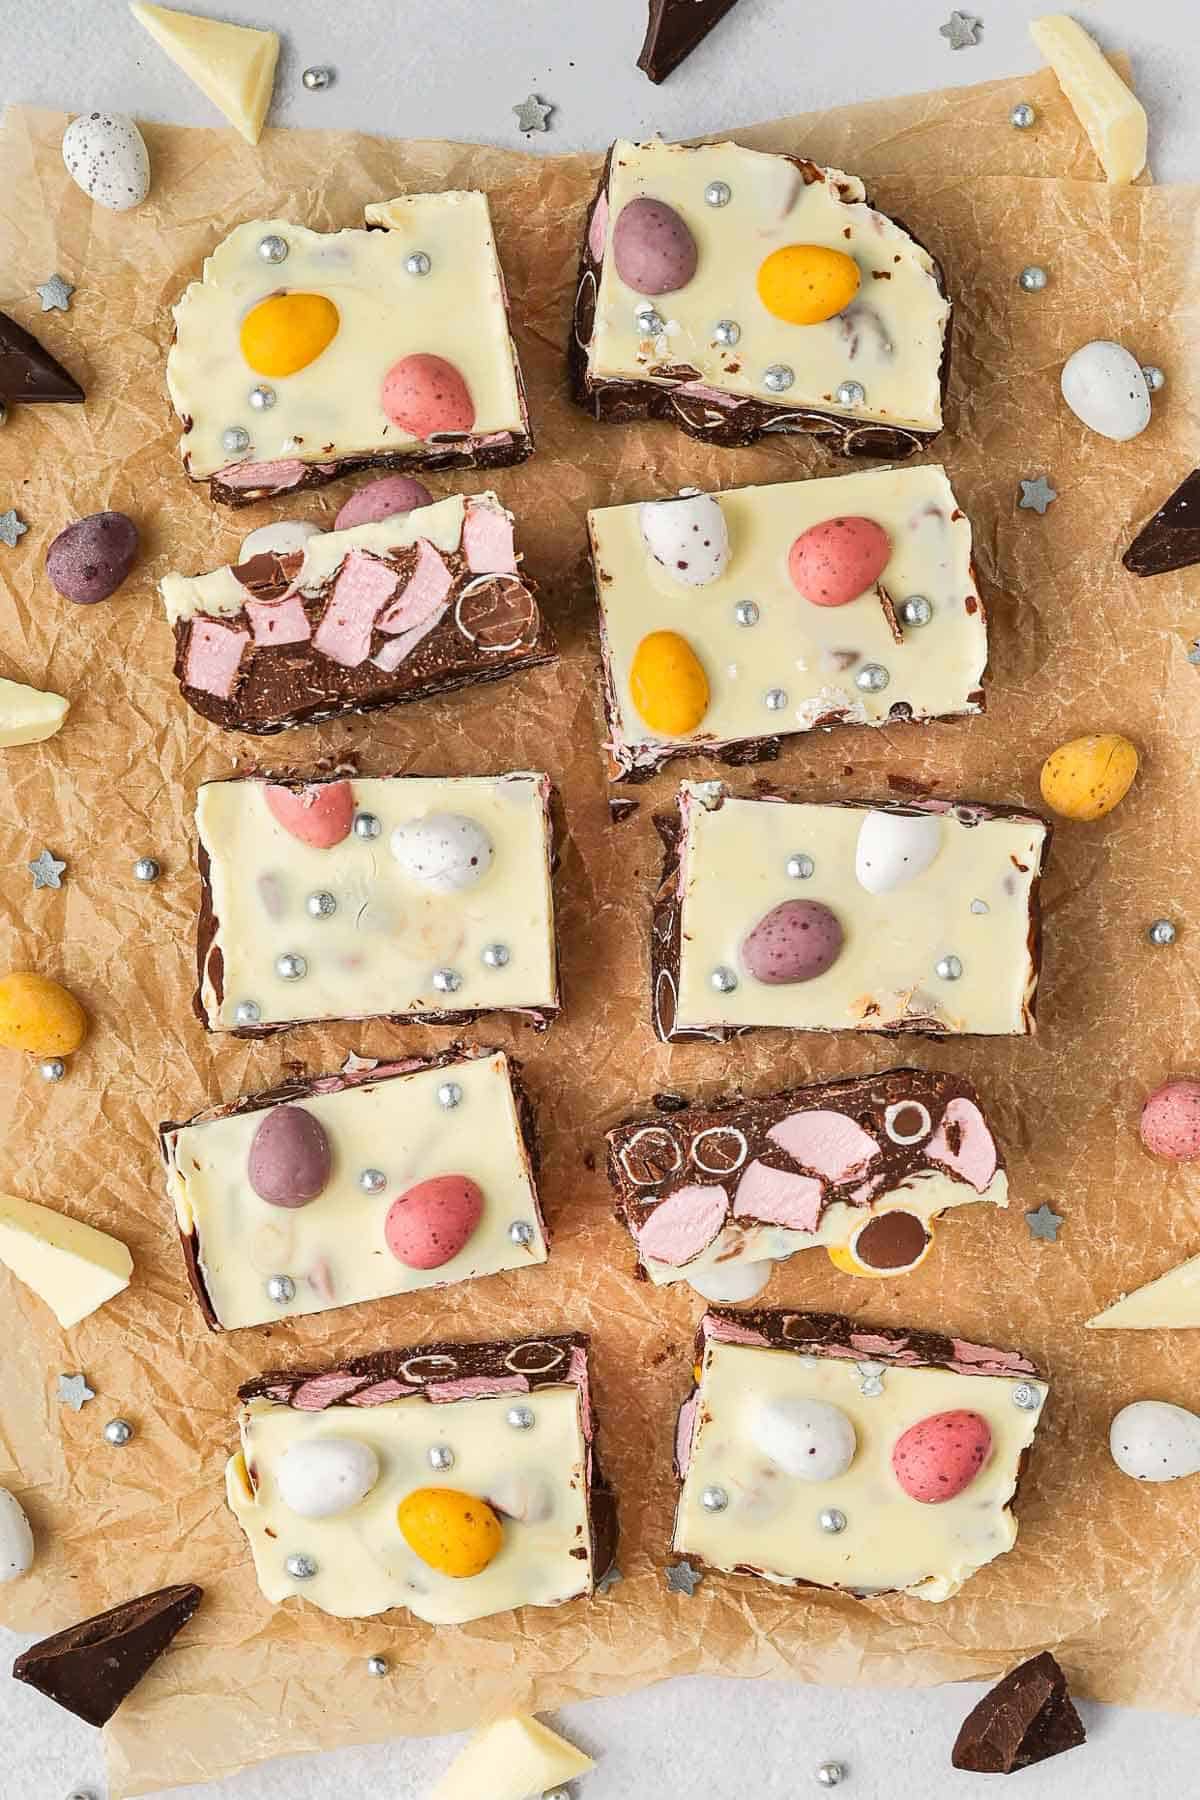 The rocky road cut into ten pieces, sitting on some baking paper with extra mini eggs around the edge.